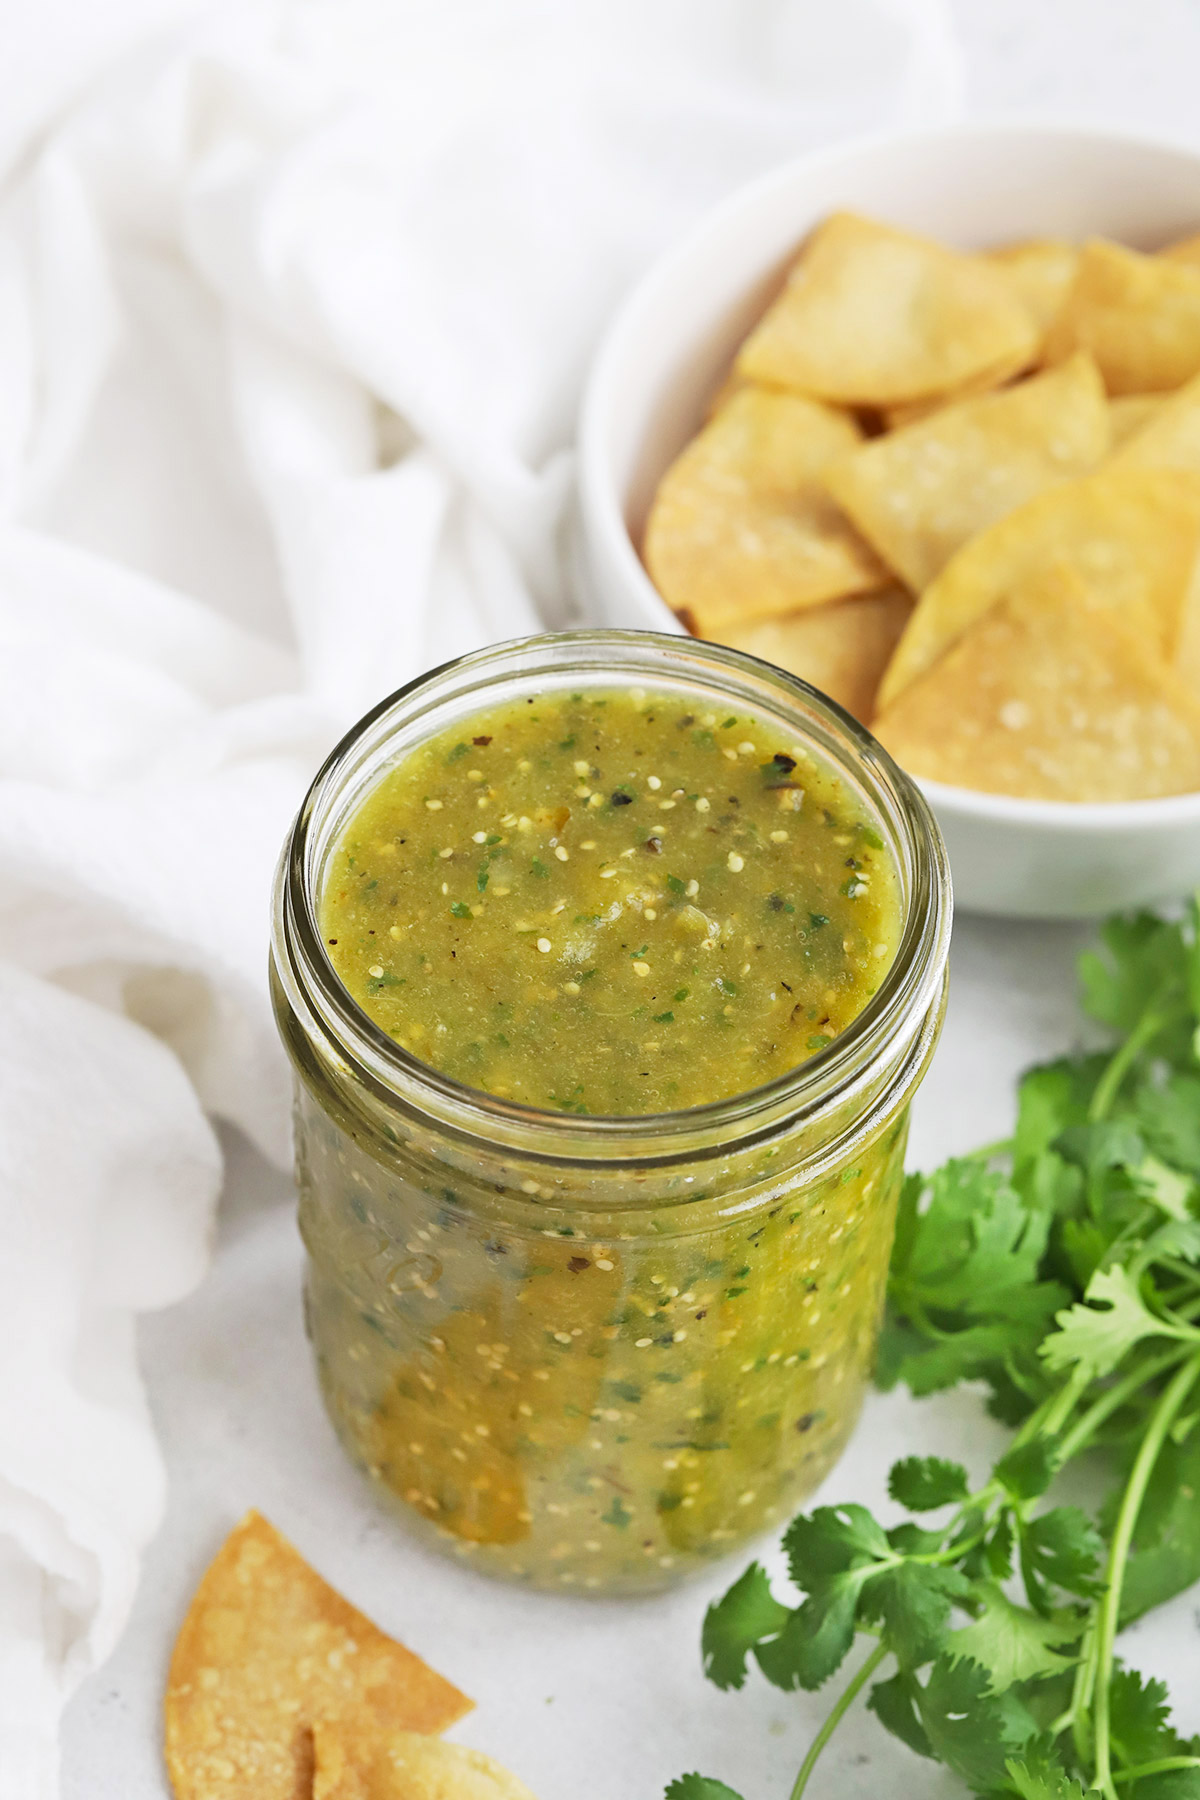 Front view of a jar of homemade salsa verde (green salsa) with fresh cilantro and tortilla chips in the background